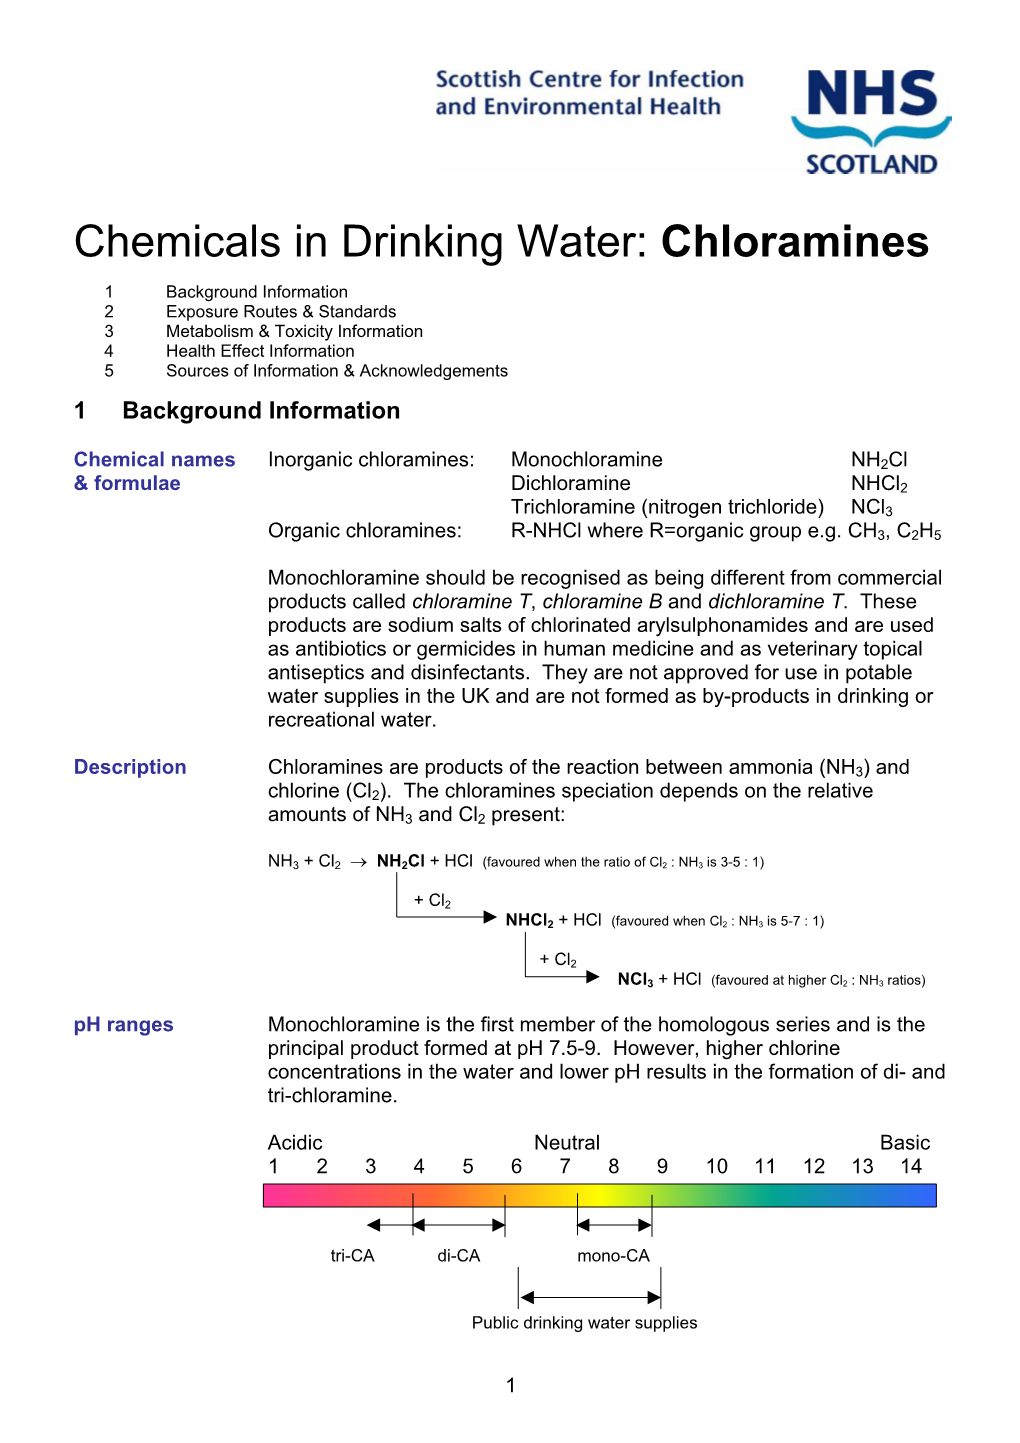 Chemicals in Drinking Water: Chloramines